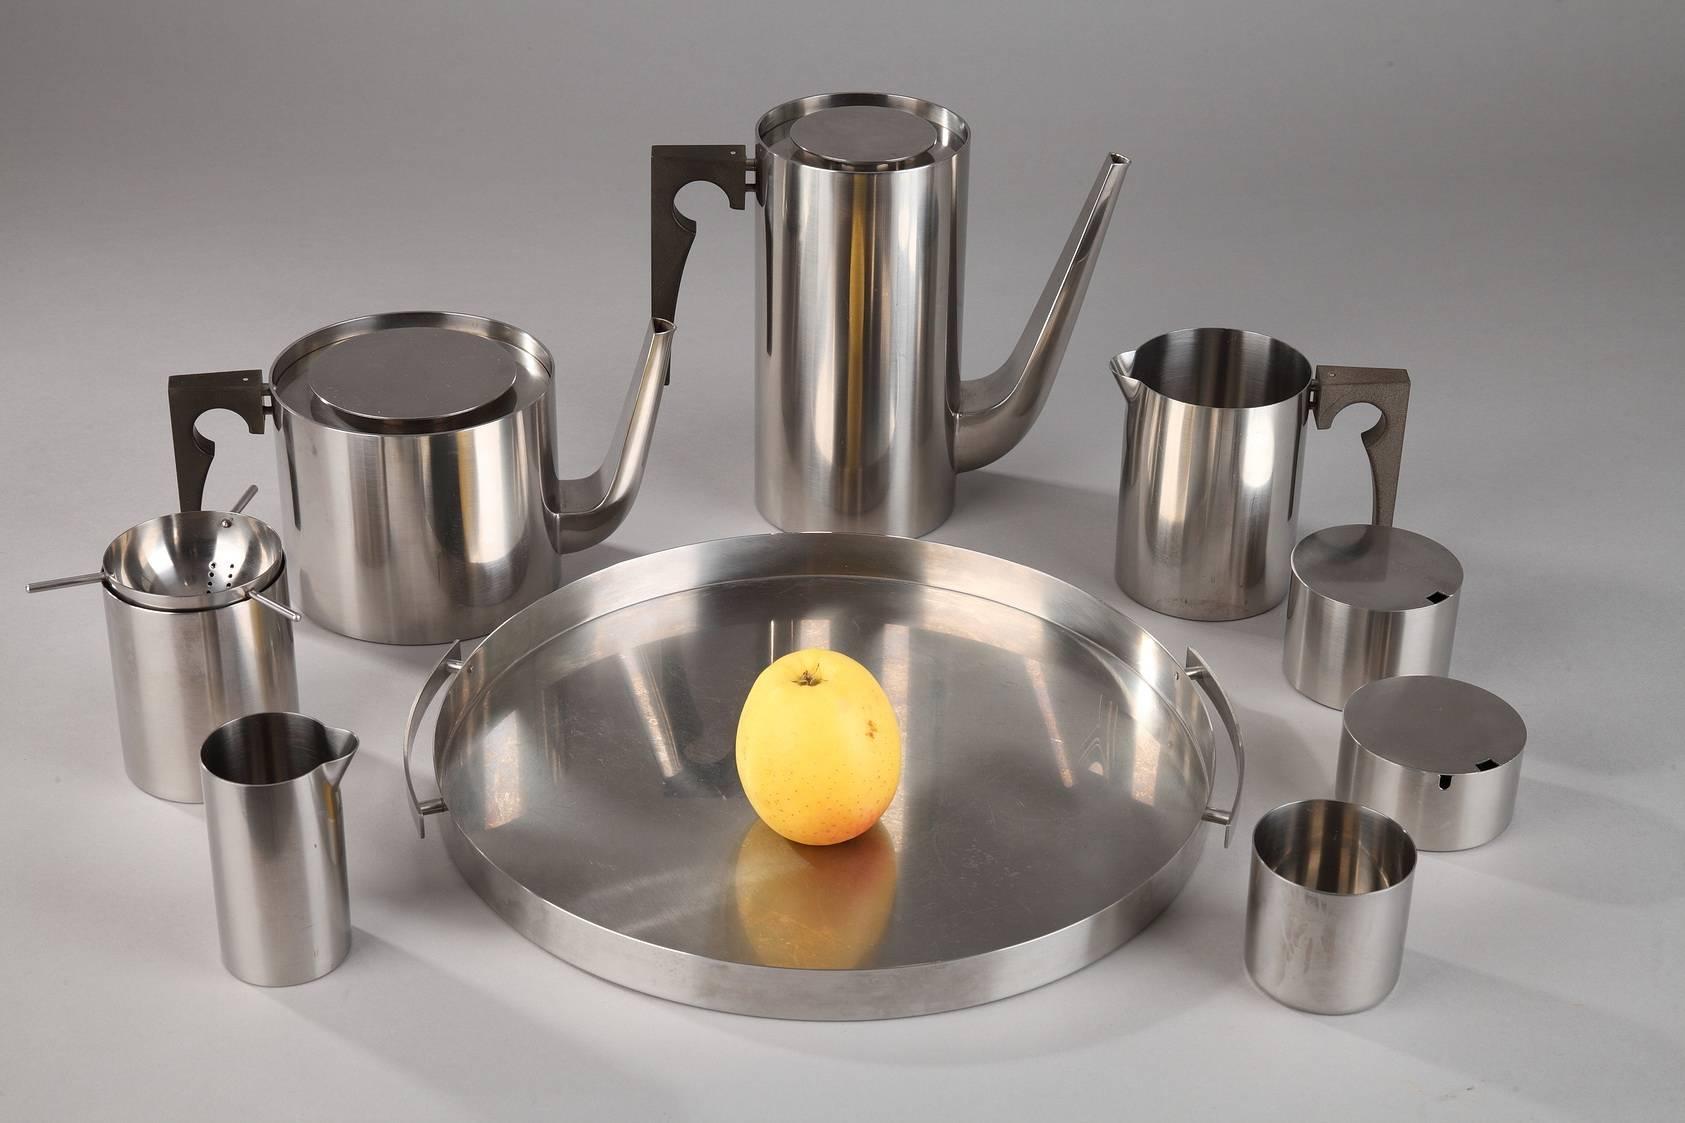 Arne Jacobsen (1902-1971) coffee and tea service, manufactured by Stelton. Launched in 1967, the Cylinda Line designed by Arne Jacobsen immediately attracted considerable attention for its serene and functionalist design. All items are made of